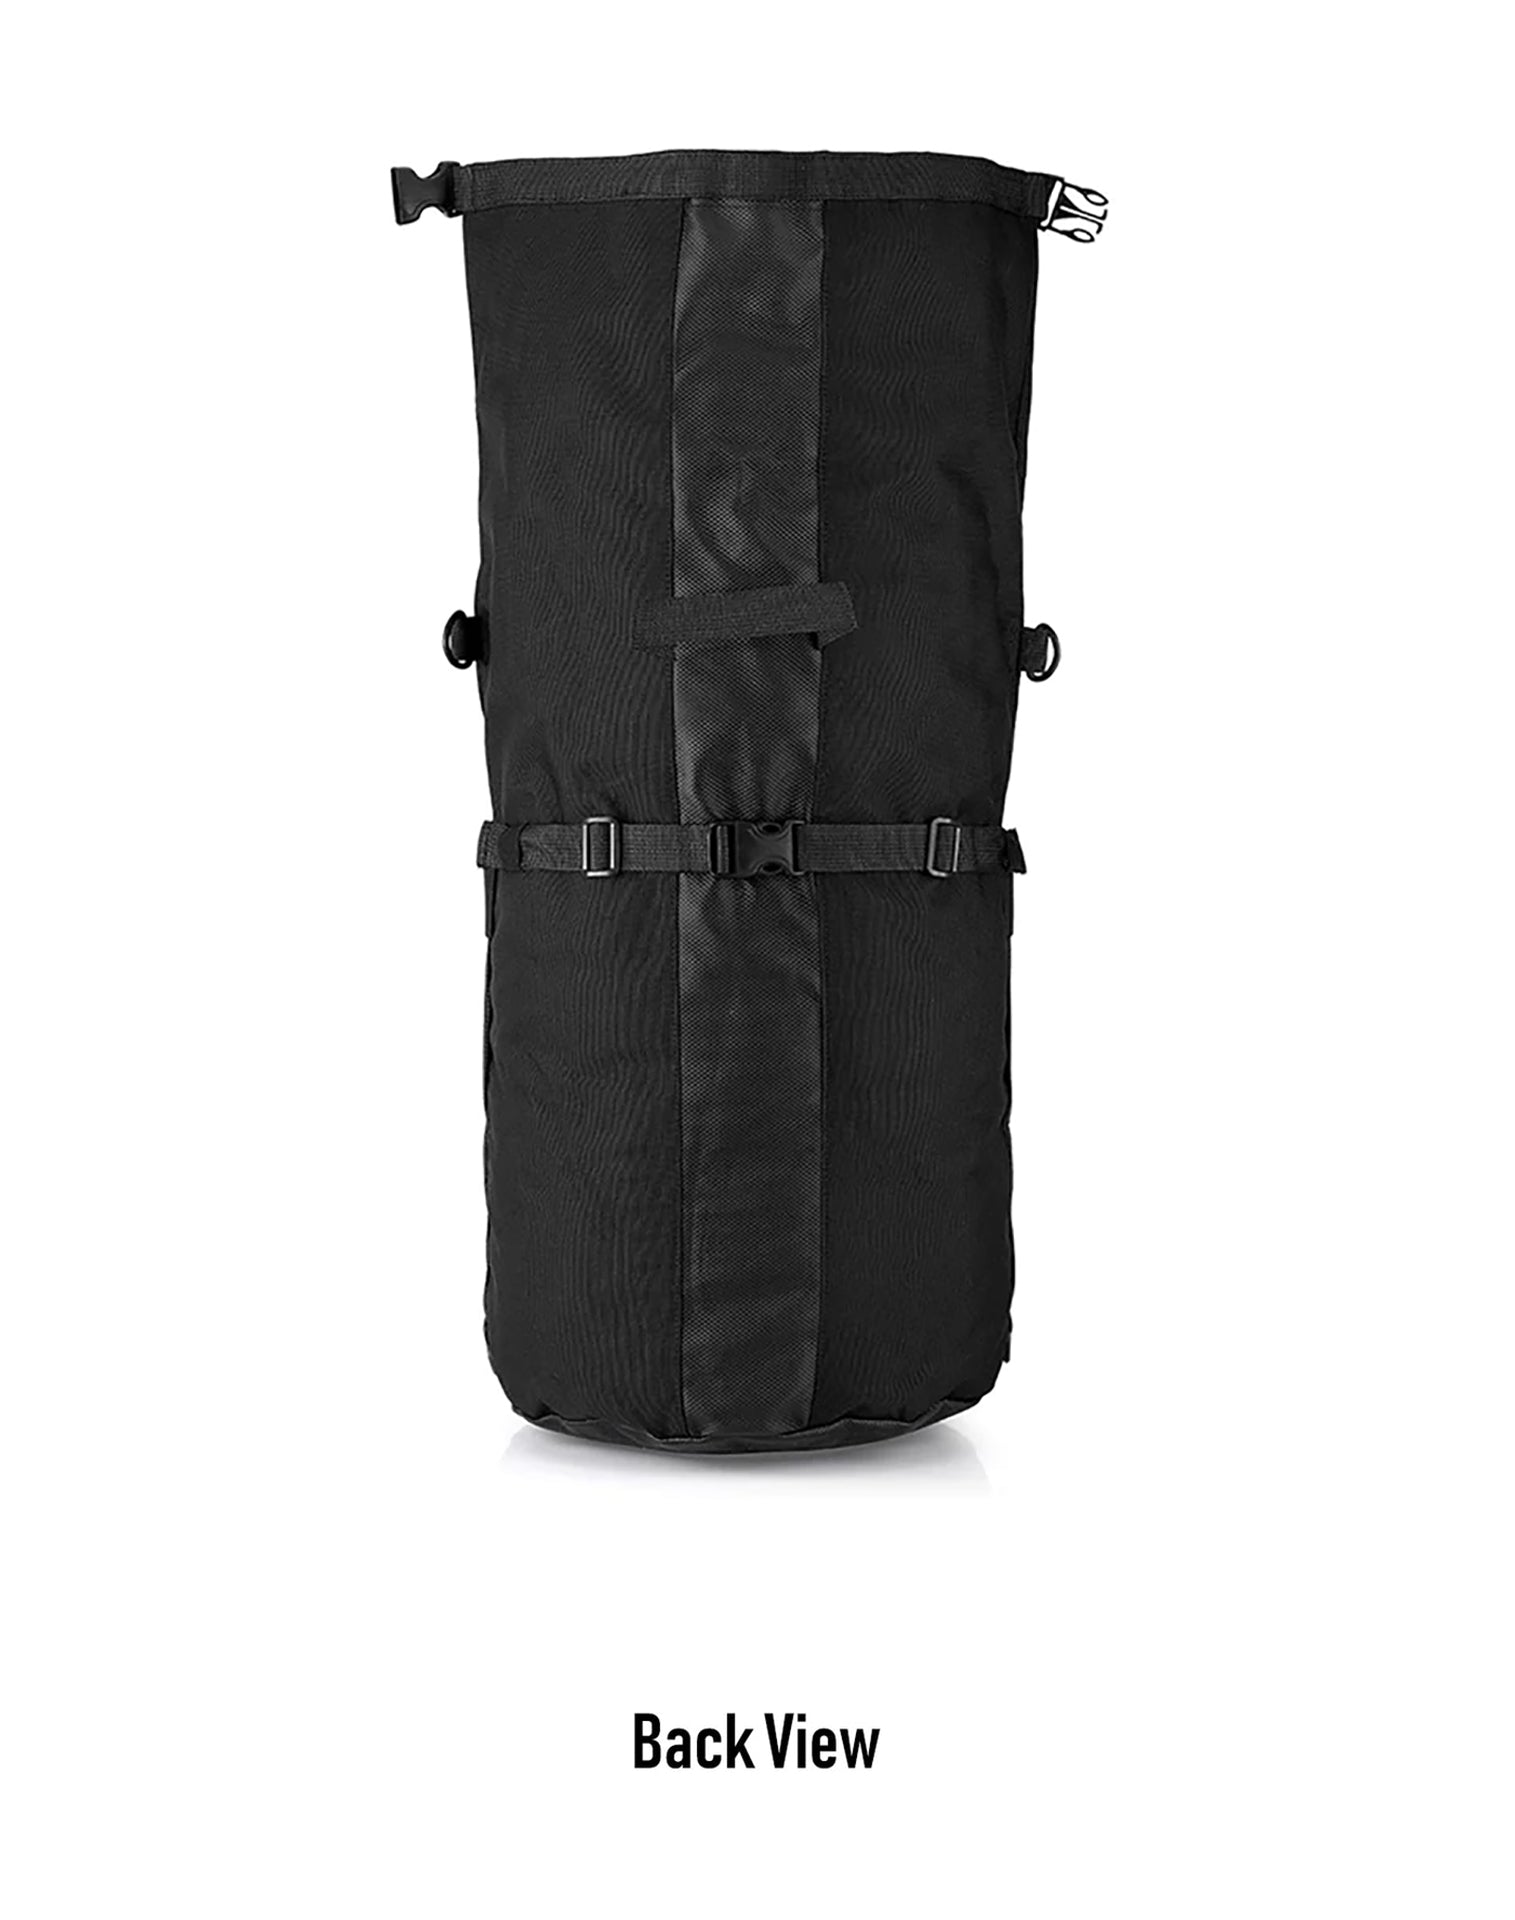 35L - Renegade XL Motorcycle Dry Backpack for Harley Davidson